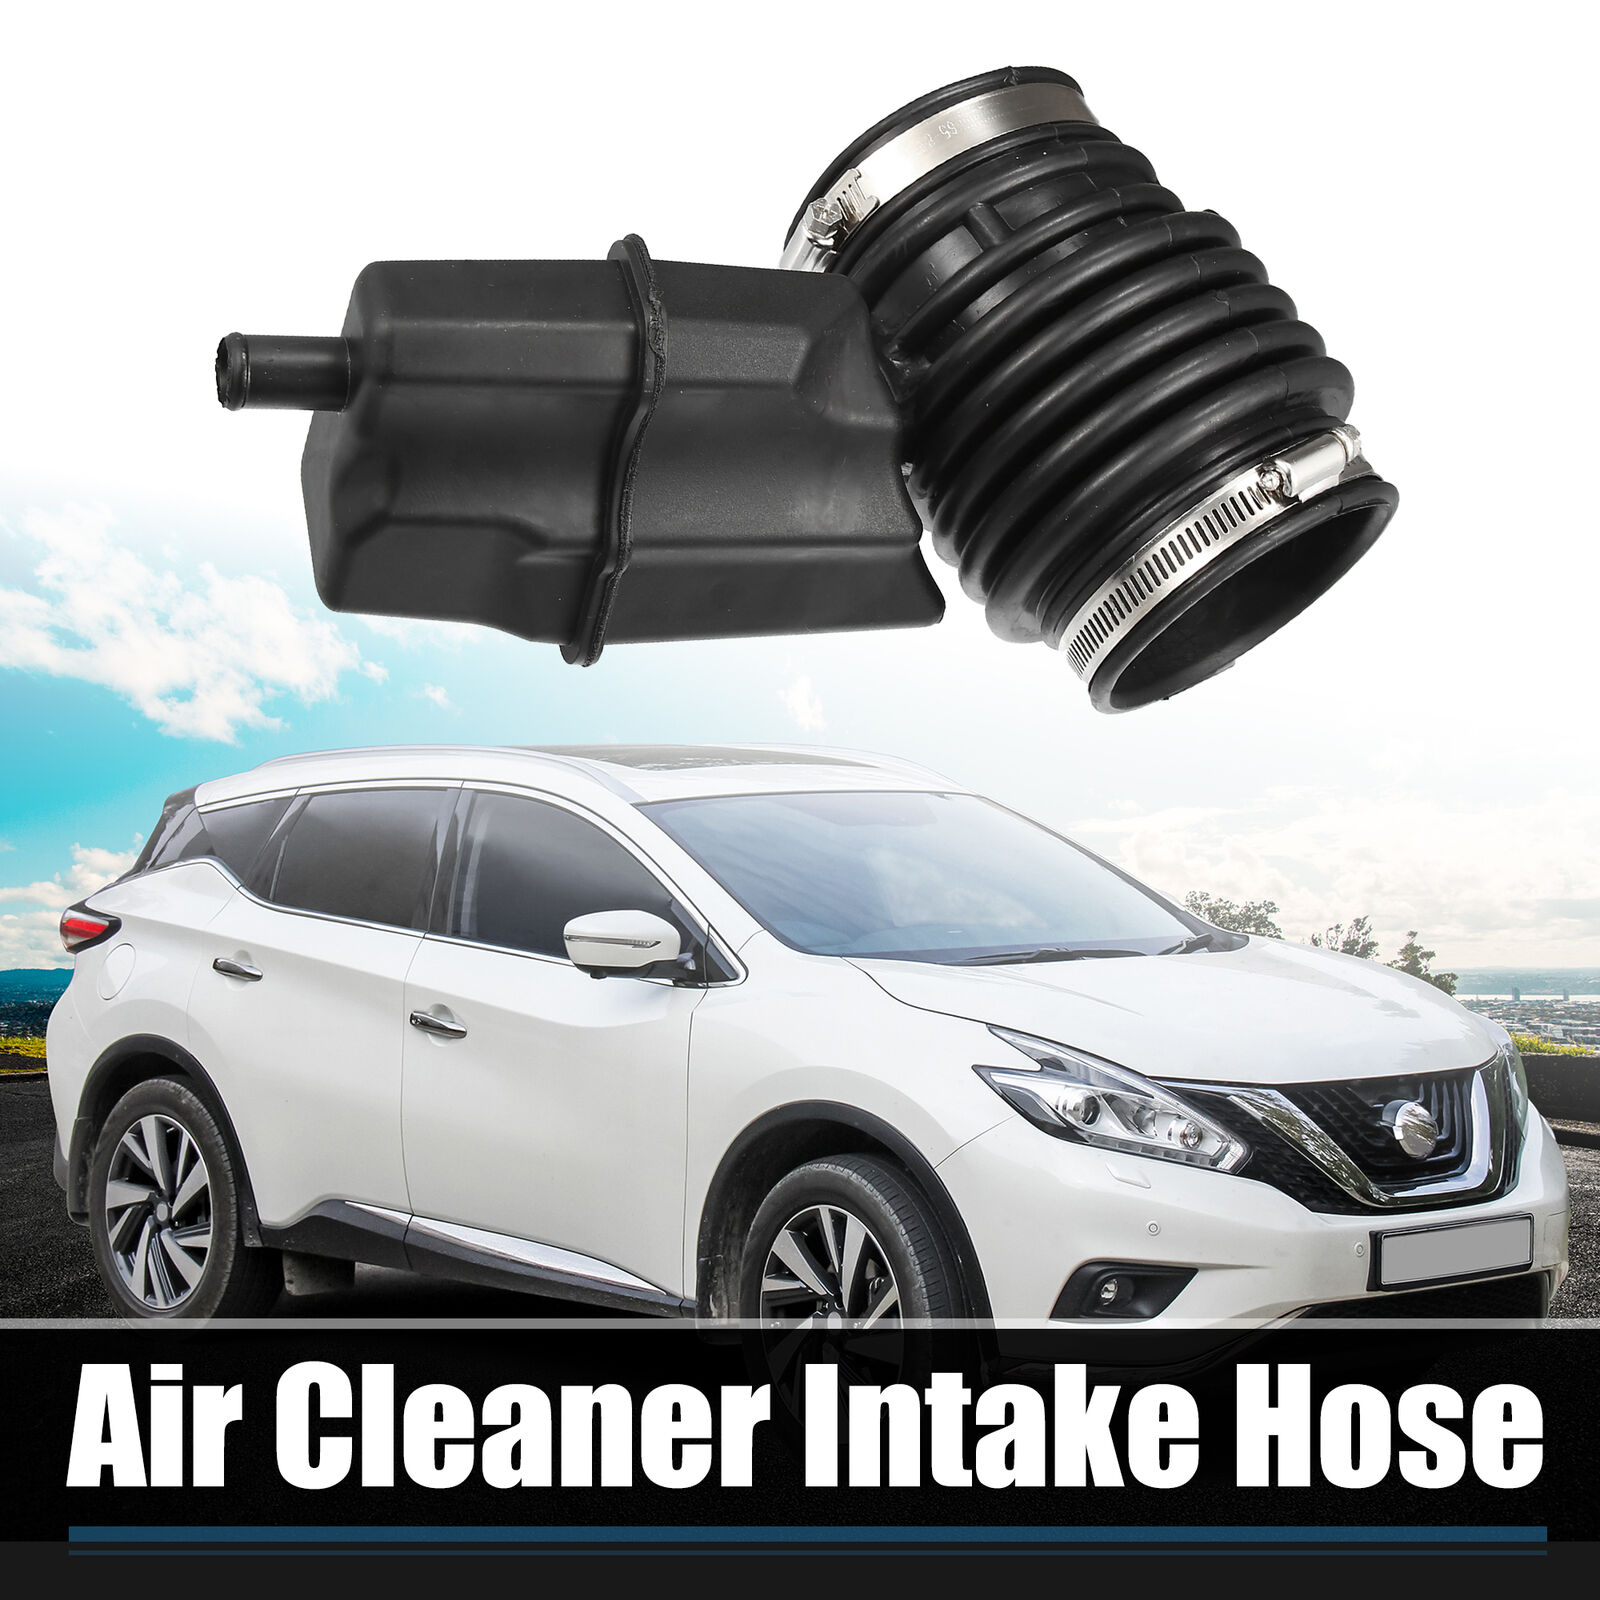 Air Cleaner Intake Hose Tube Boot Replaces 16576-1AA1A for Nissan Quest Murano